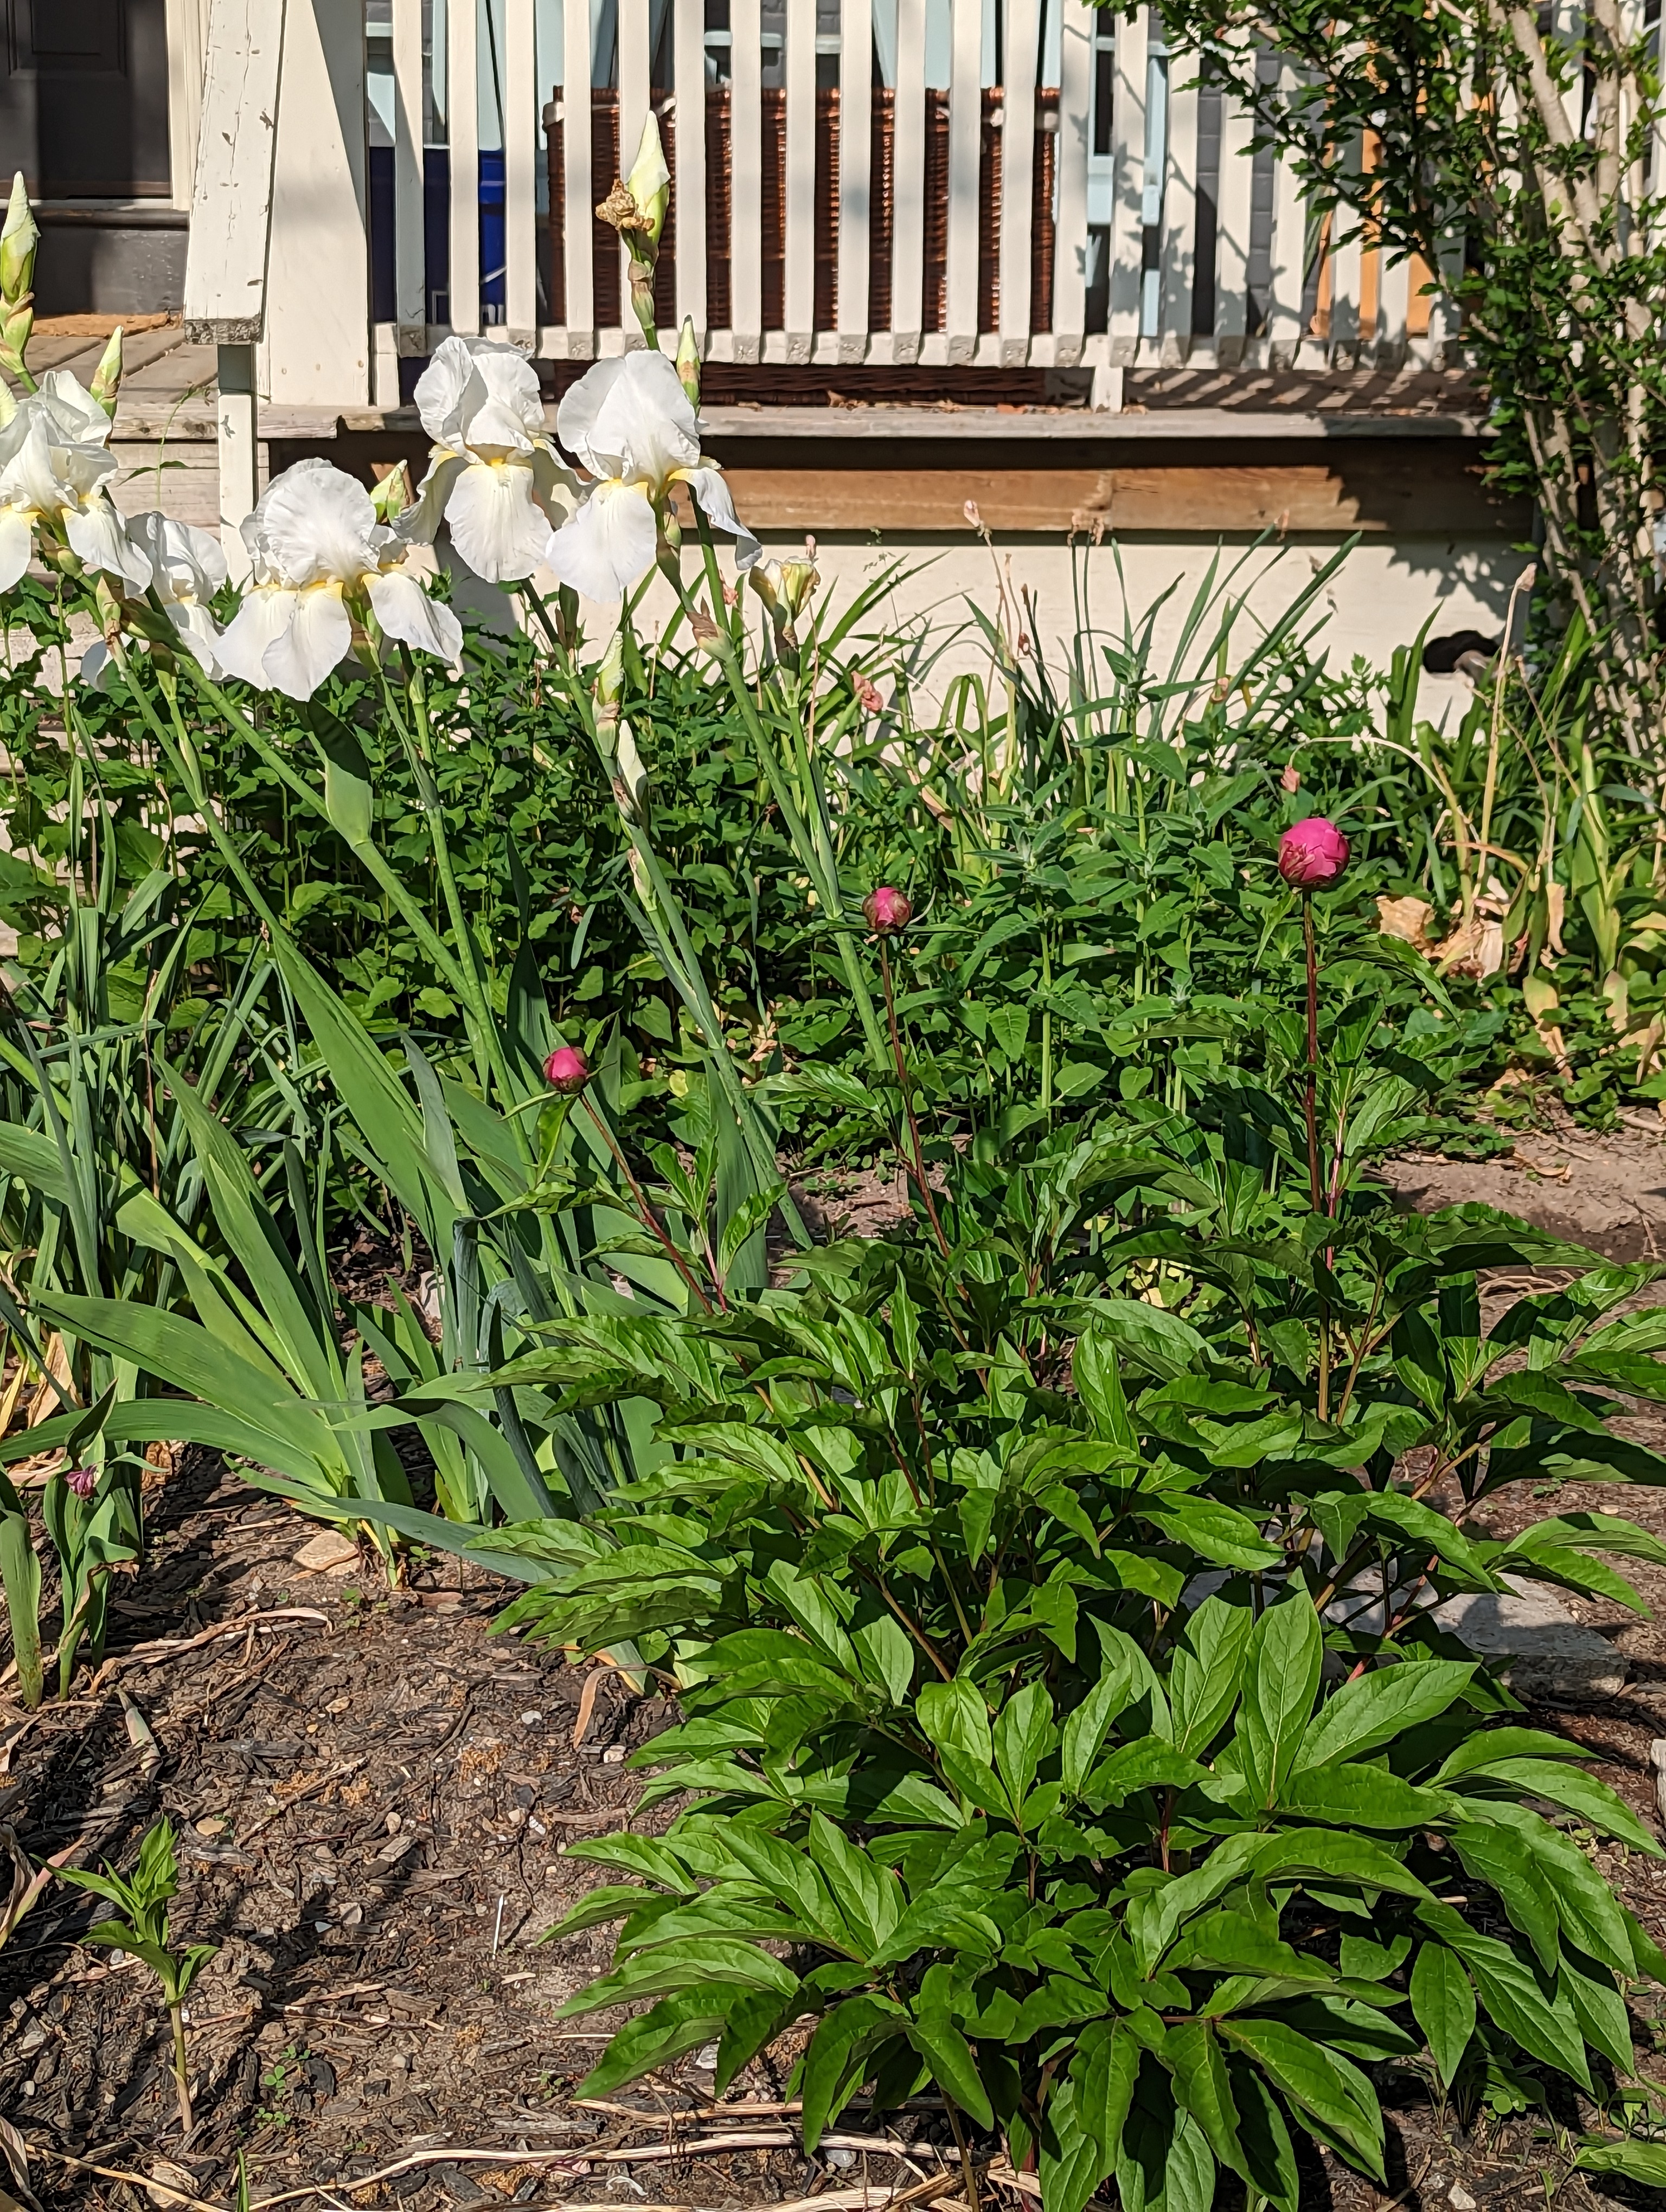 on the left side, white irises in full bloom. to the right, the bud of a pink peony flower just about to open